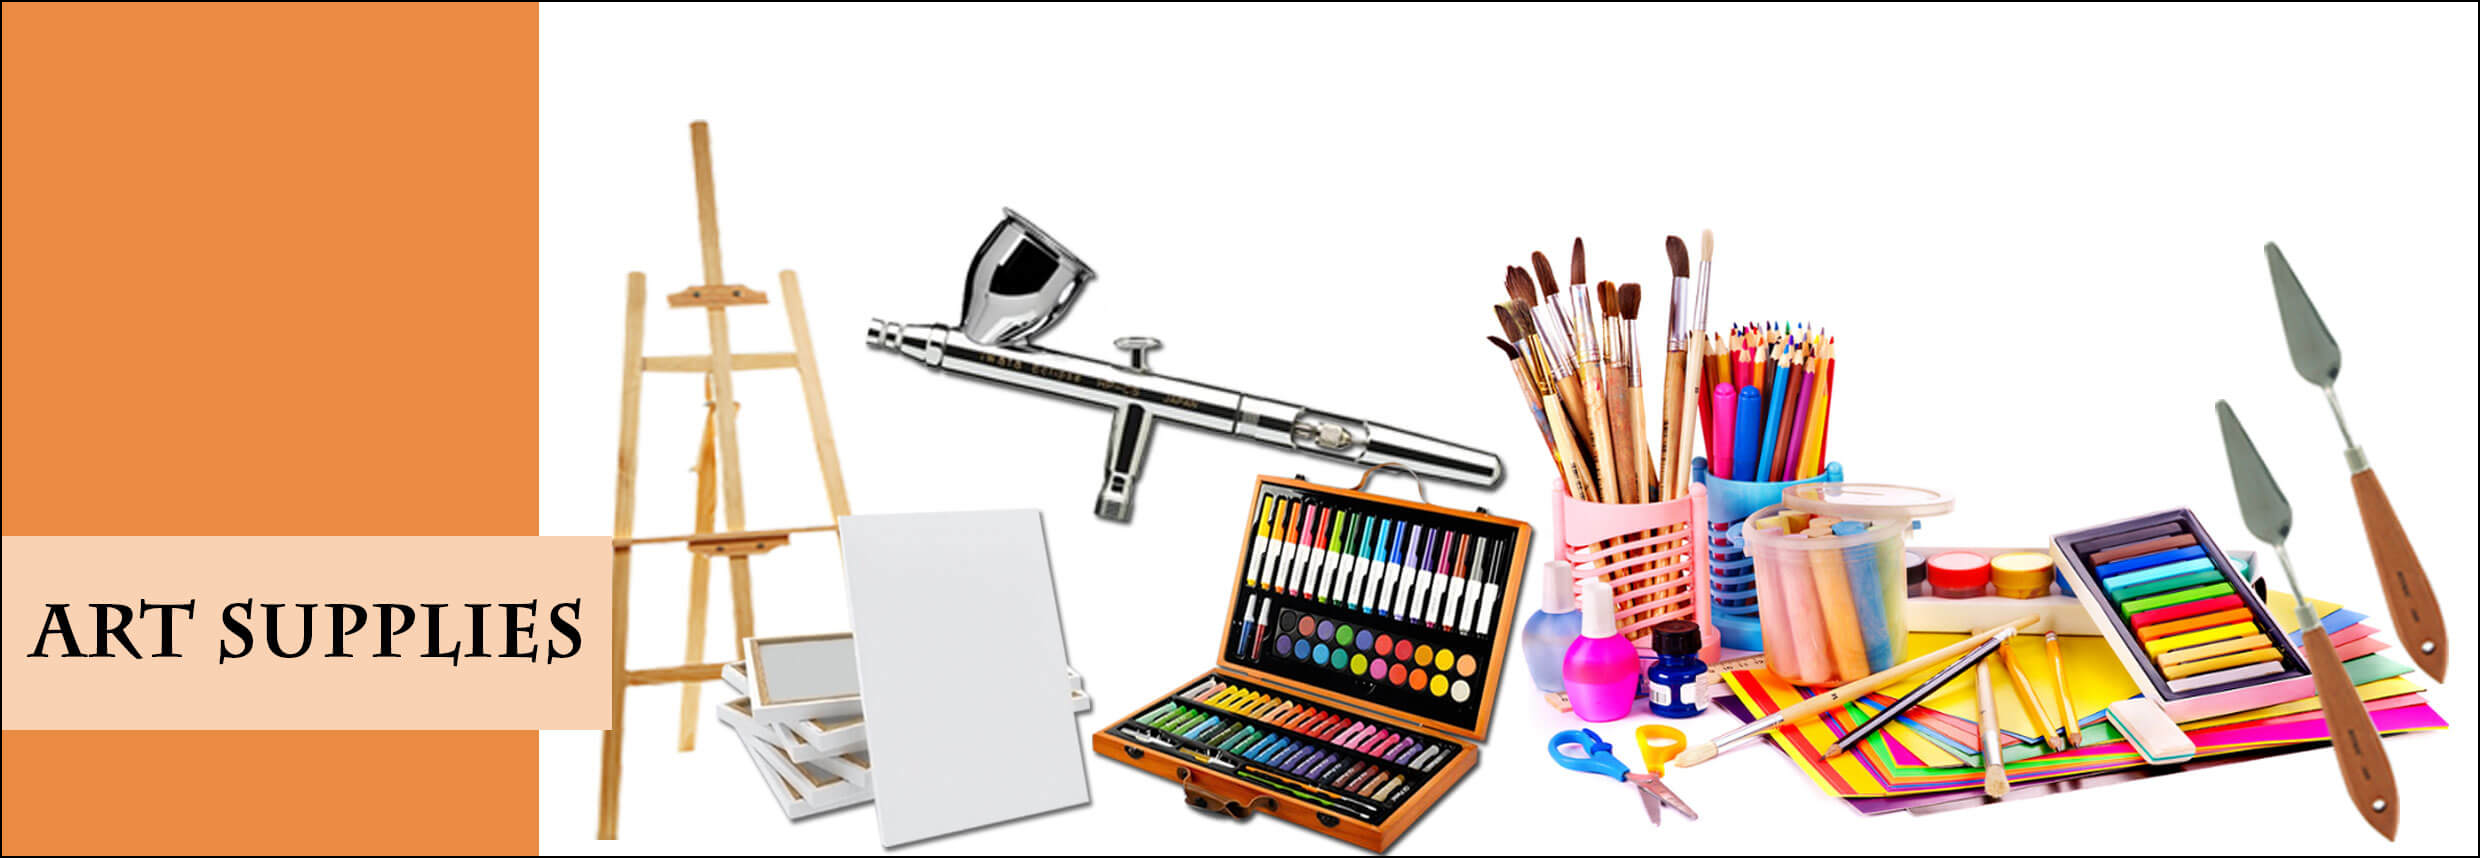 Art Supplies Clipart Set Painting, Drawing, Art, Glue, Crafting